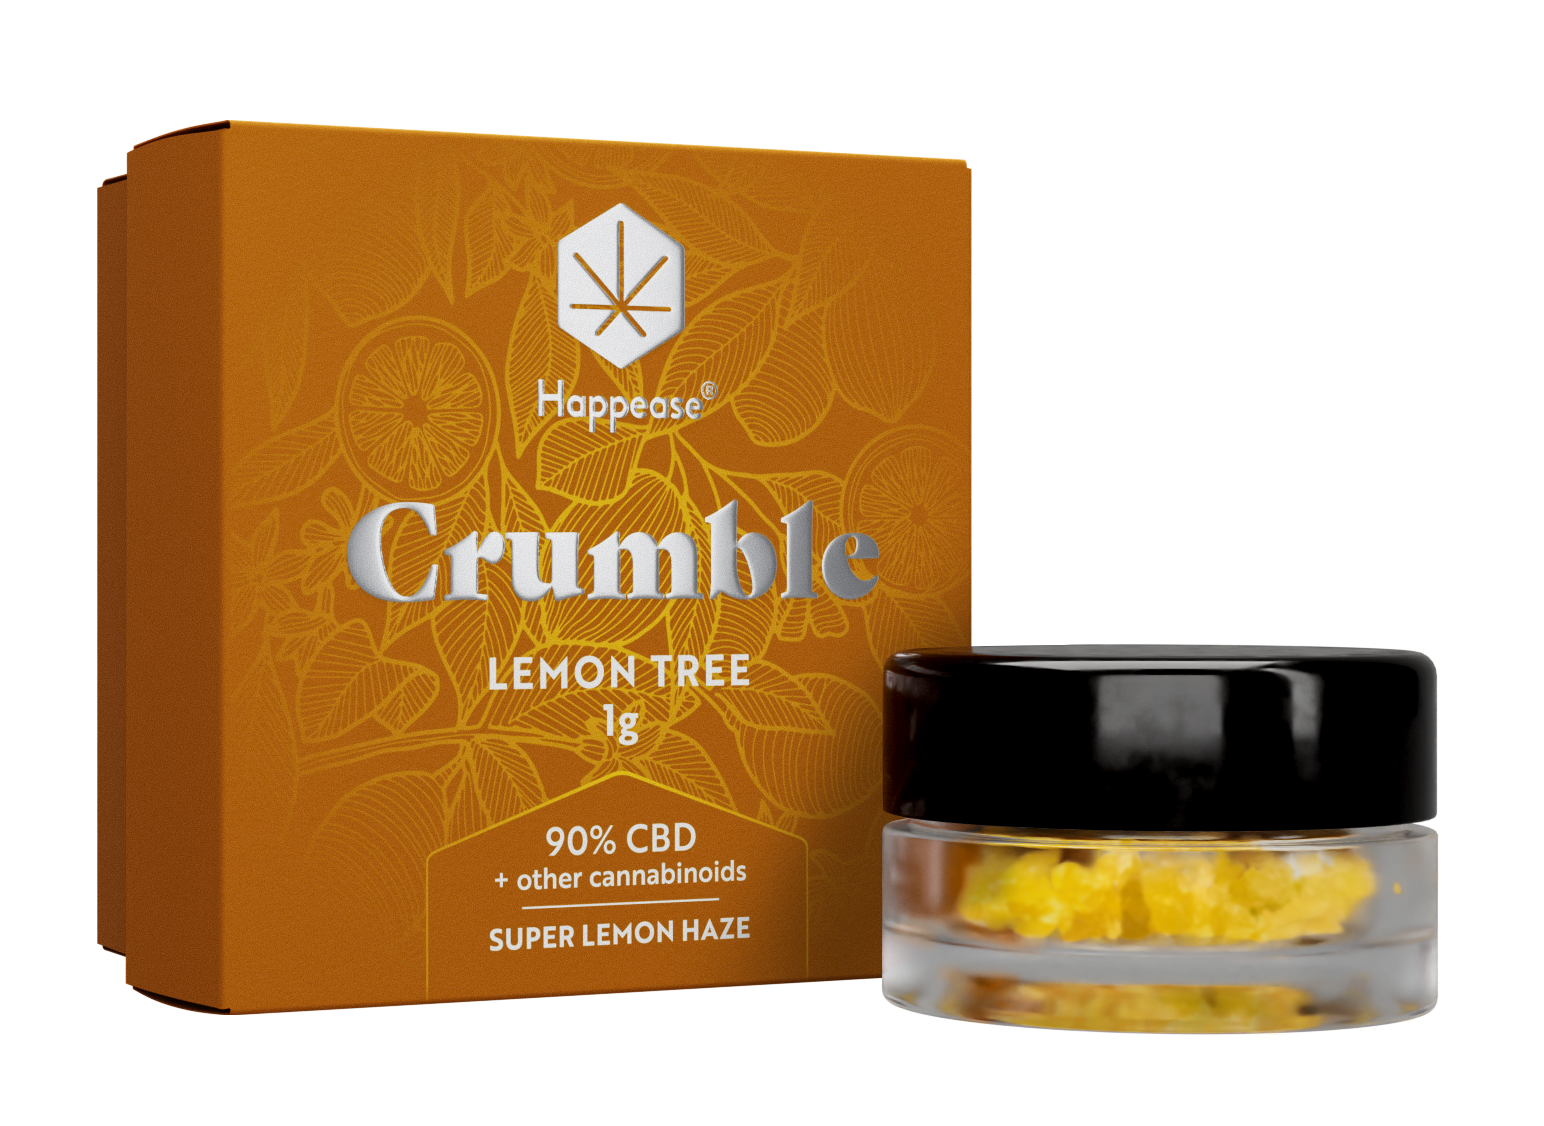 Happease_extract_crumble-LT-with-jar